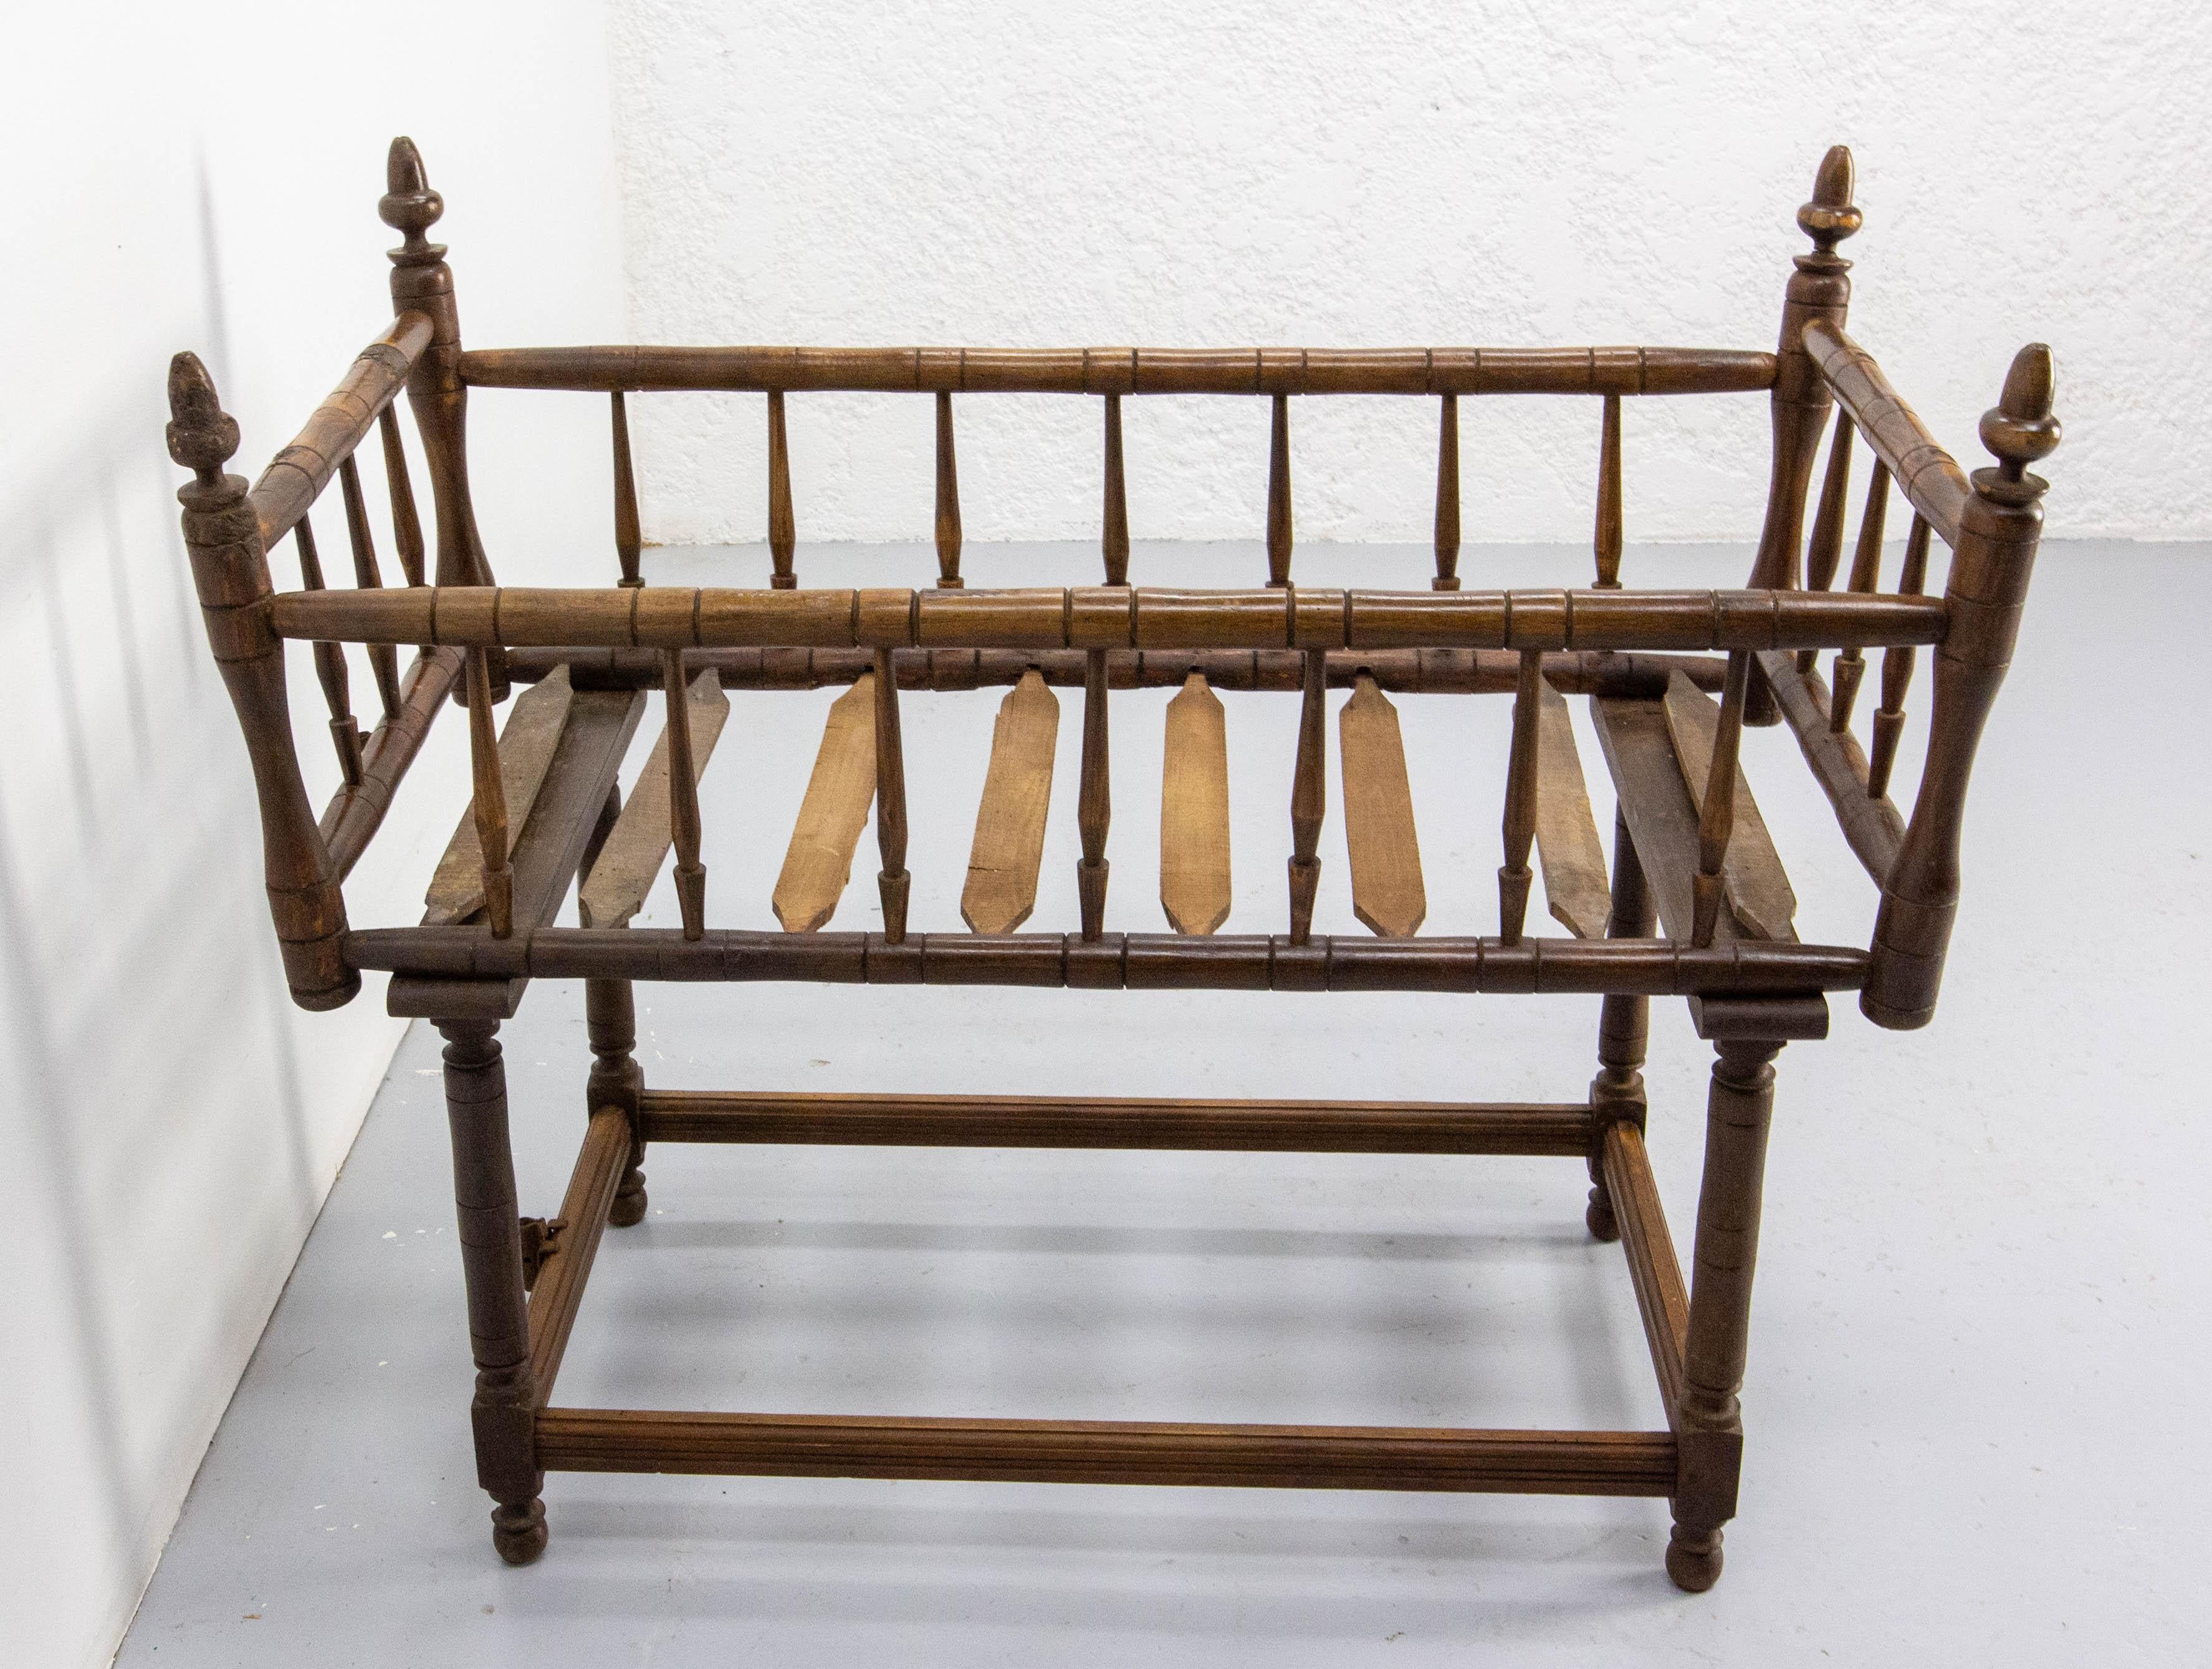 French  old baby bassinet or cradle. 
Can be used in a baby or a child room for storing toys and comforters.
Very decorative and full of character

Good condition

Shipping:
52 / 96 / 78 cm 6.8 kg